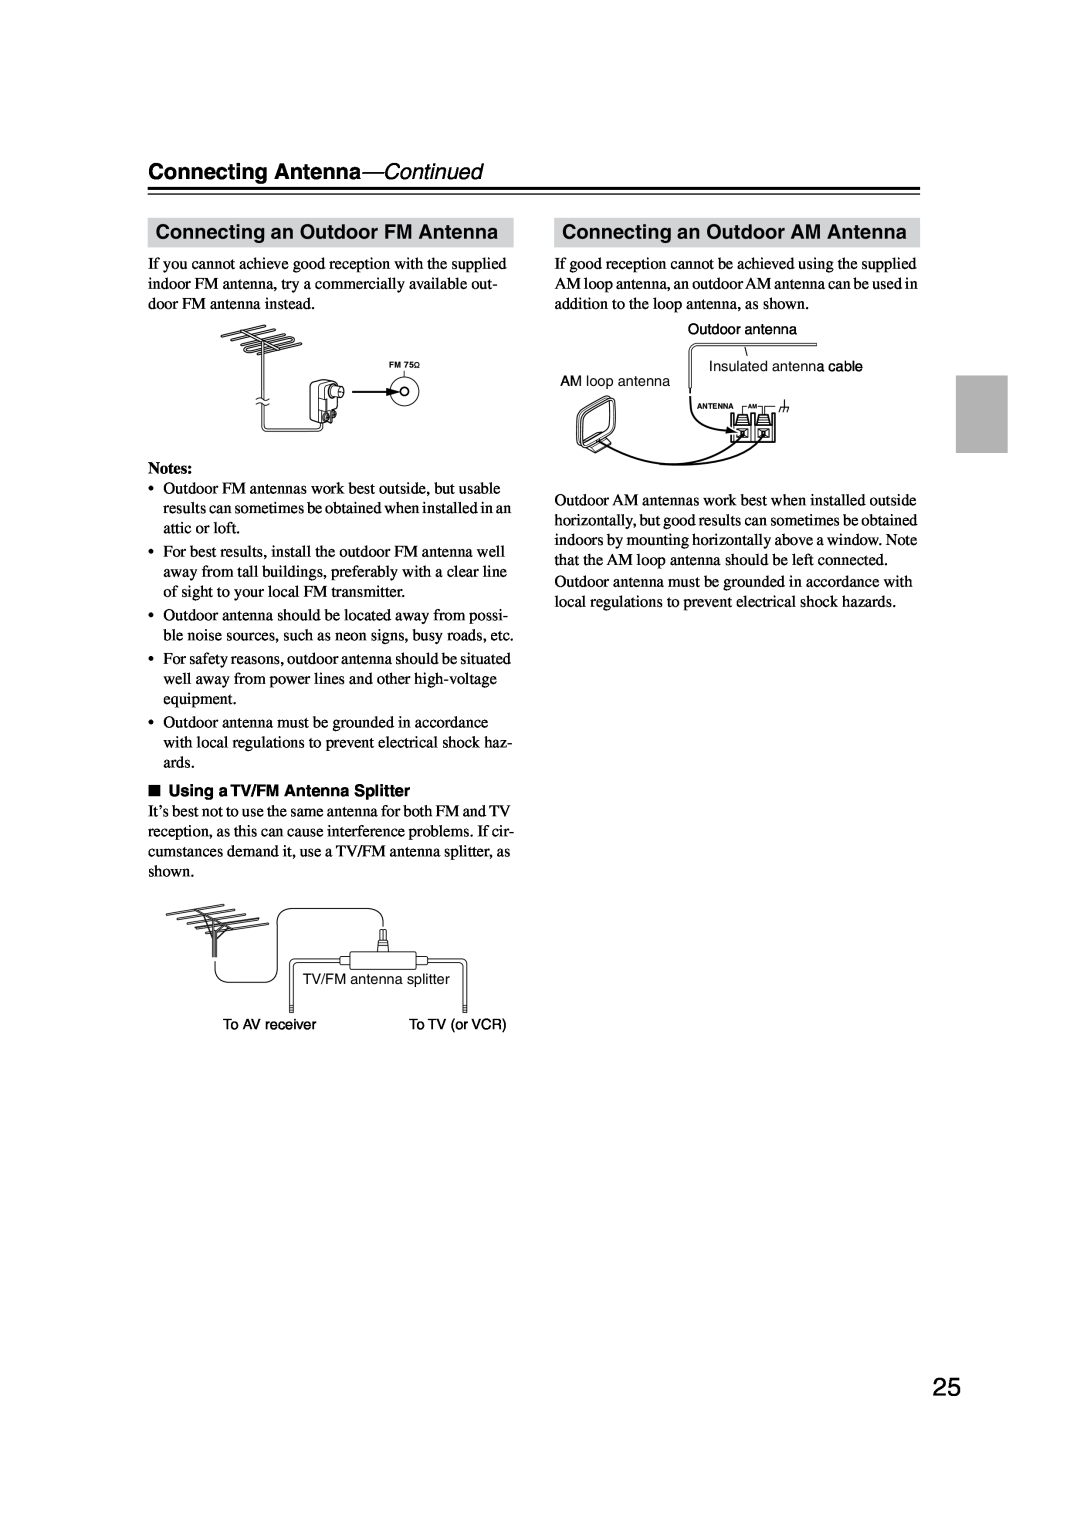 Onkyo HT-R340, HT-S3100 Connecting Antenna-Continued, Connecting an Outdoor FM Antenna, Connecting an Outdoor AM Antenna 